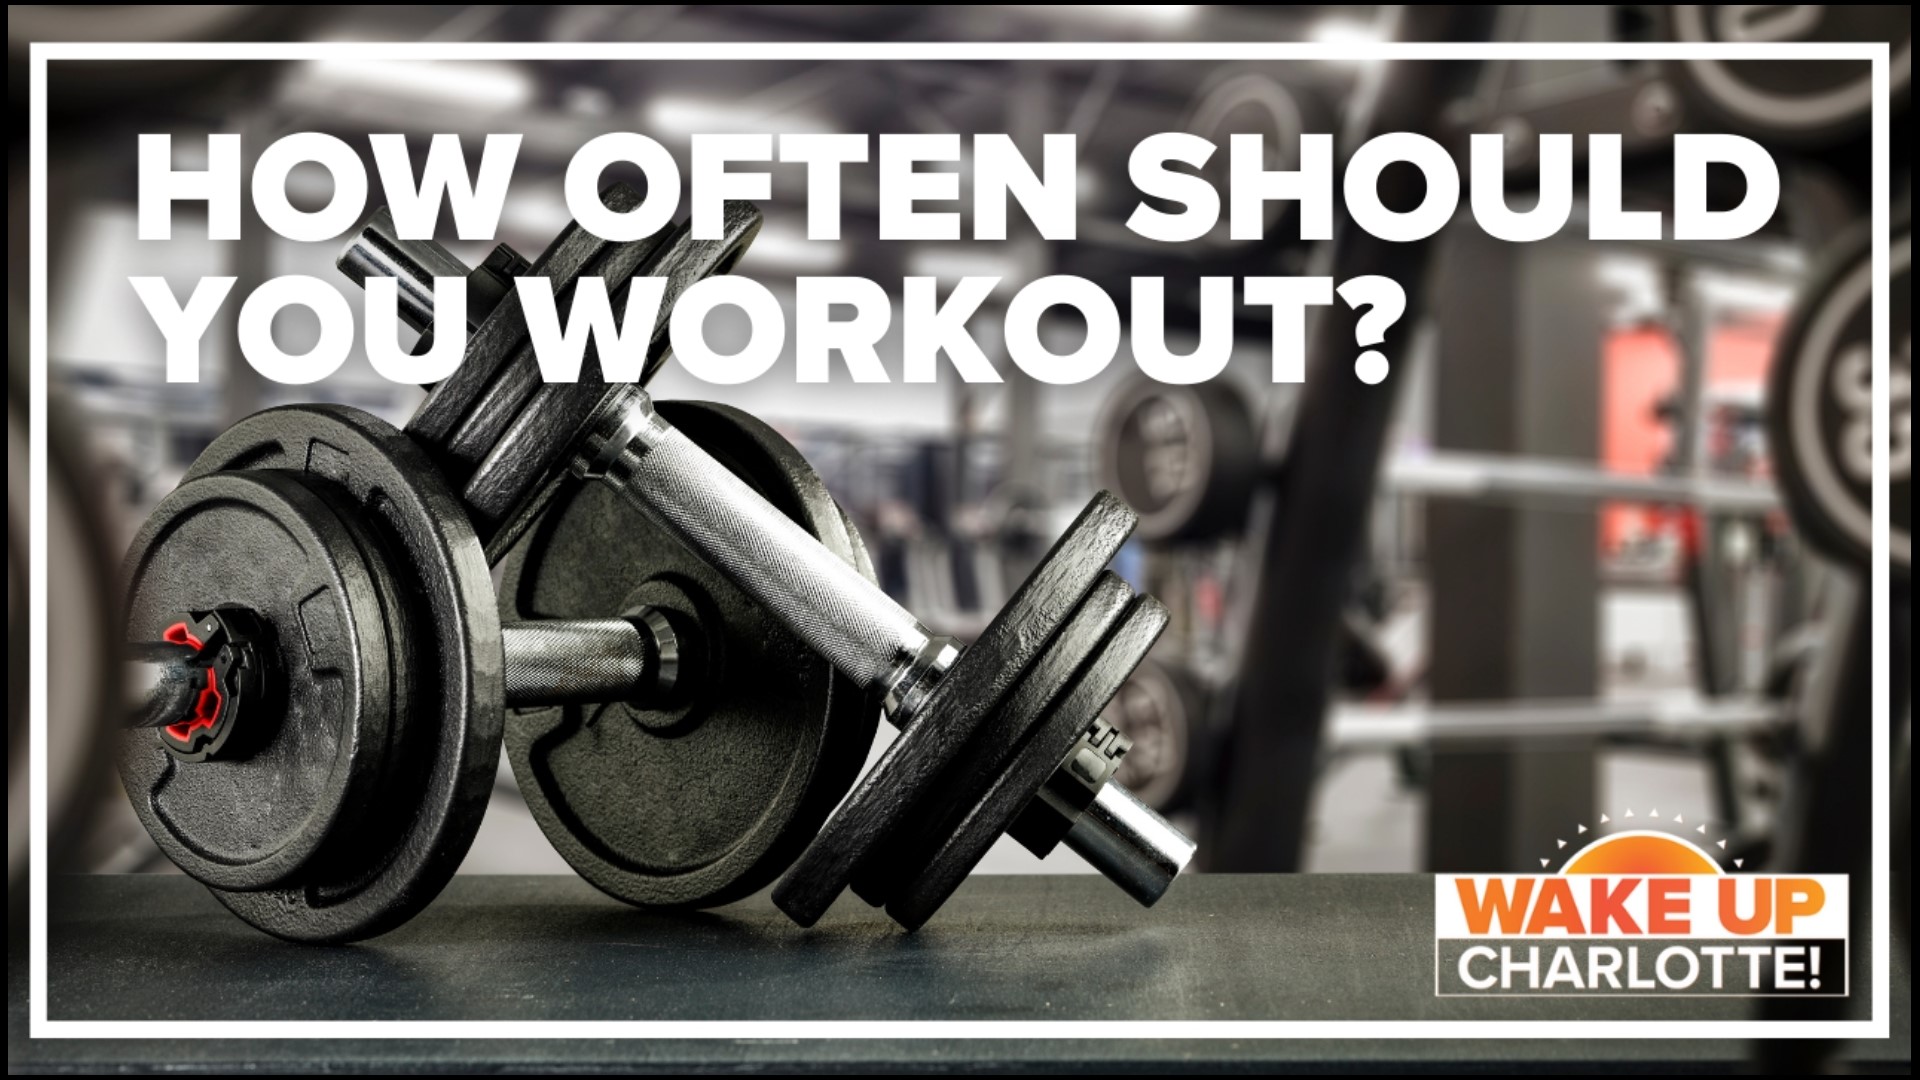 When should I workout?